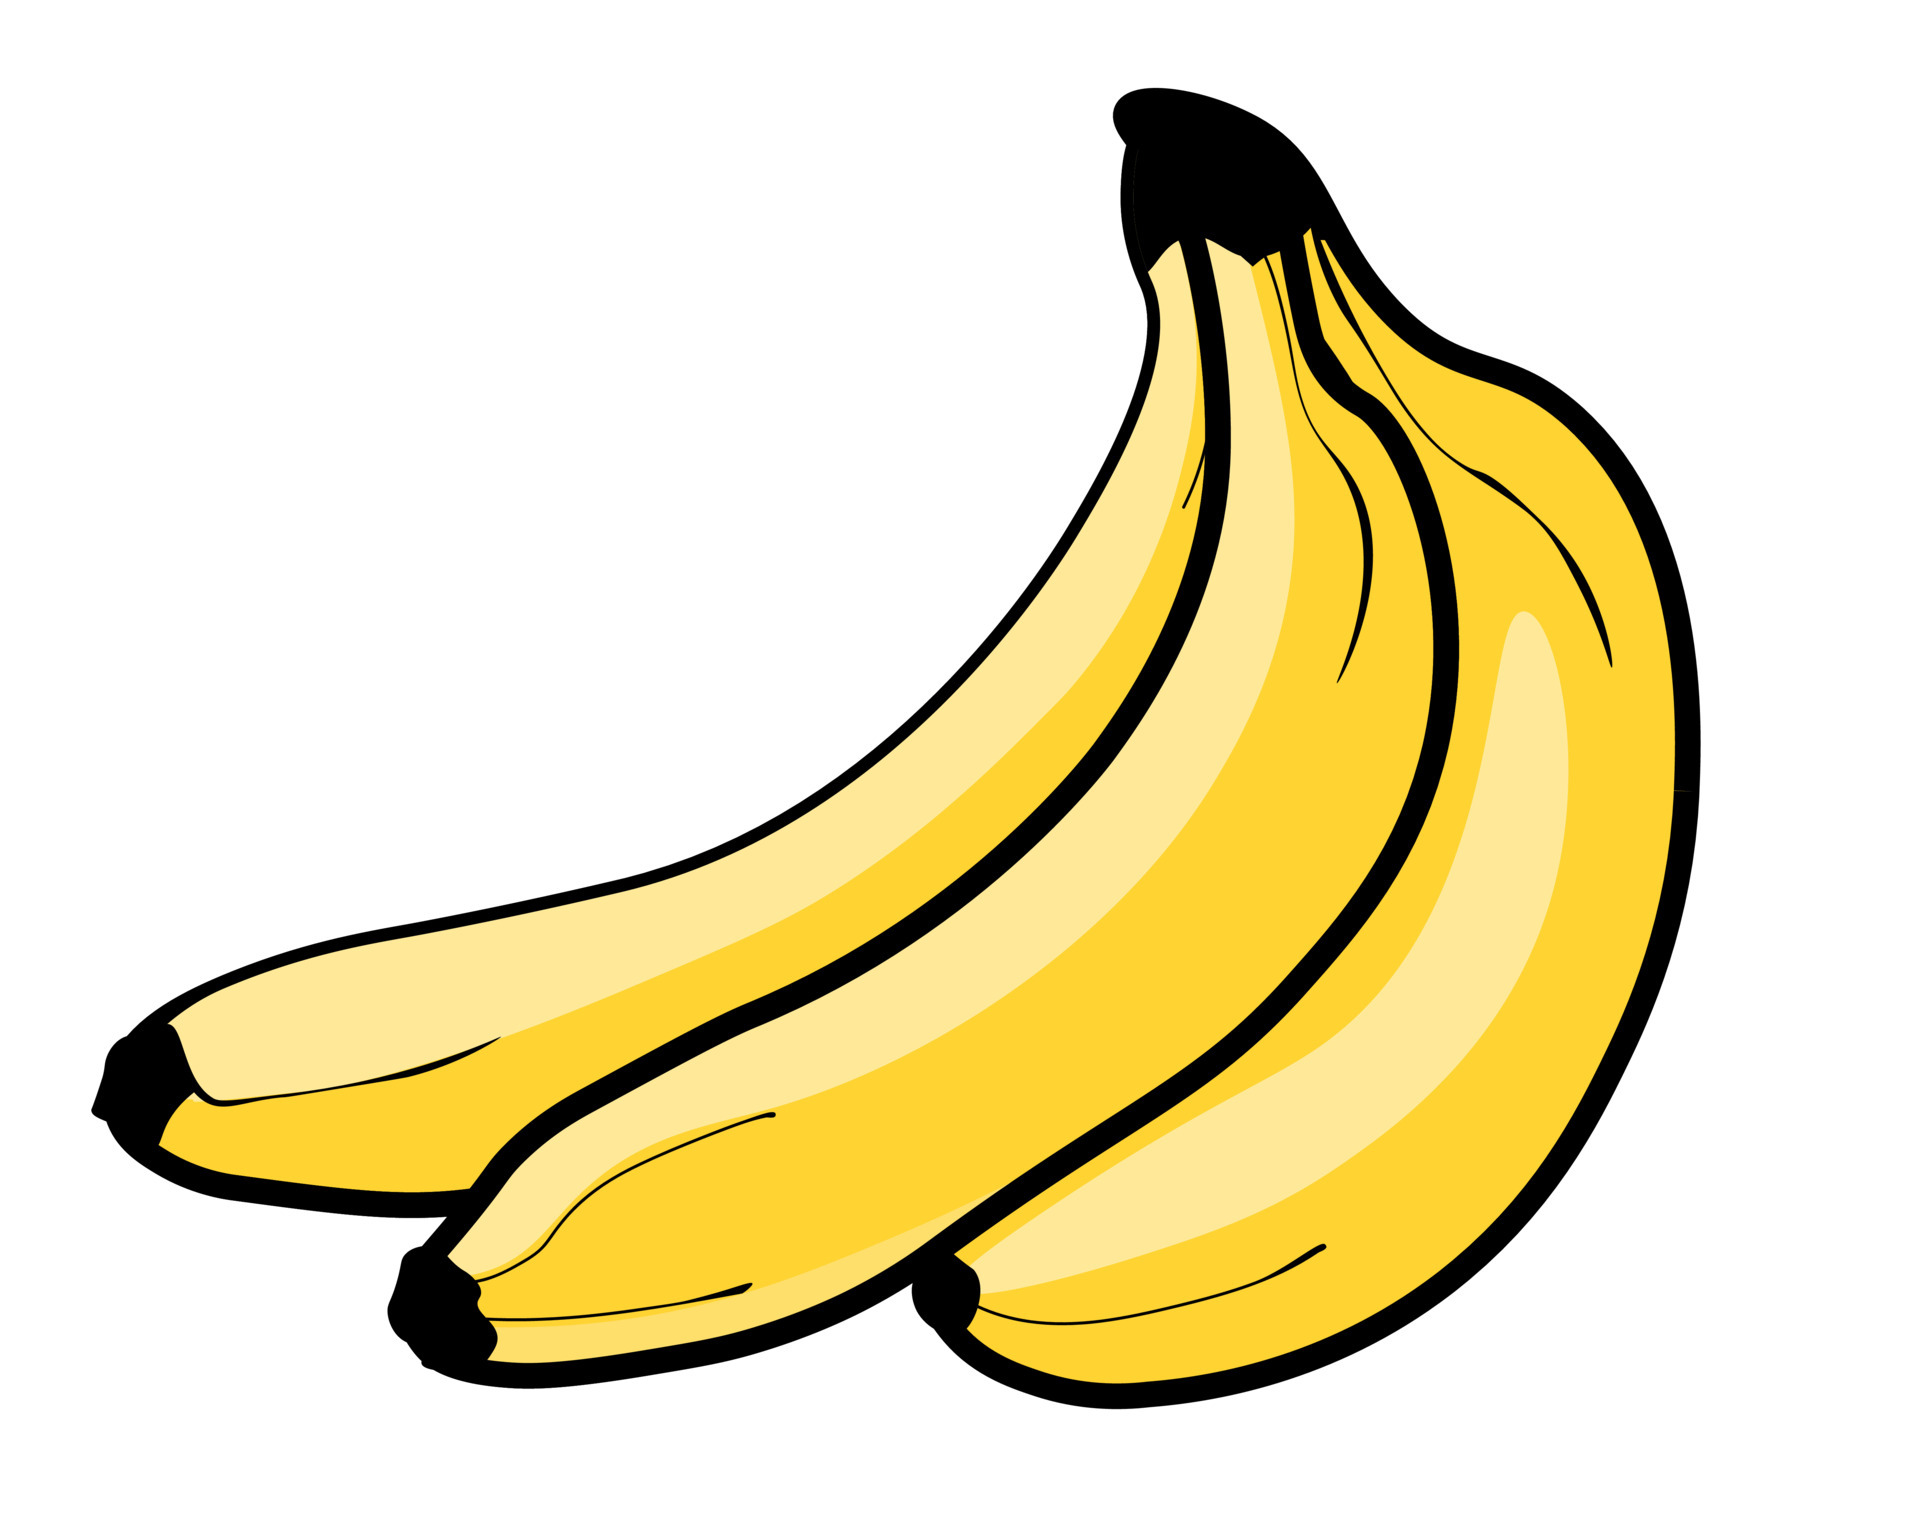 https://static.vecteezy.com/system/resources/previews/004/242/485/original/banana-bunch-of-three-pieces-graphics-free-vector.jpg